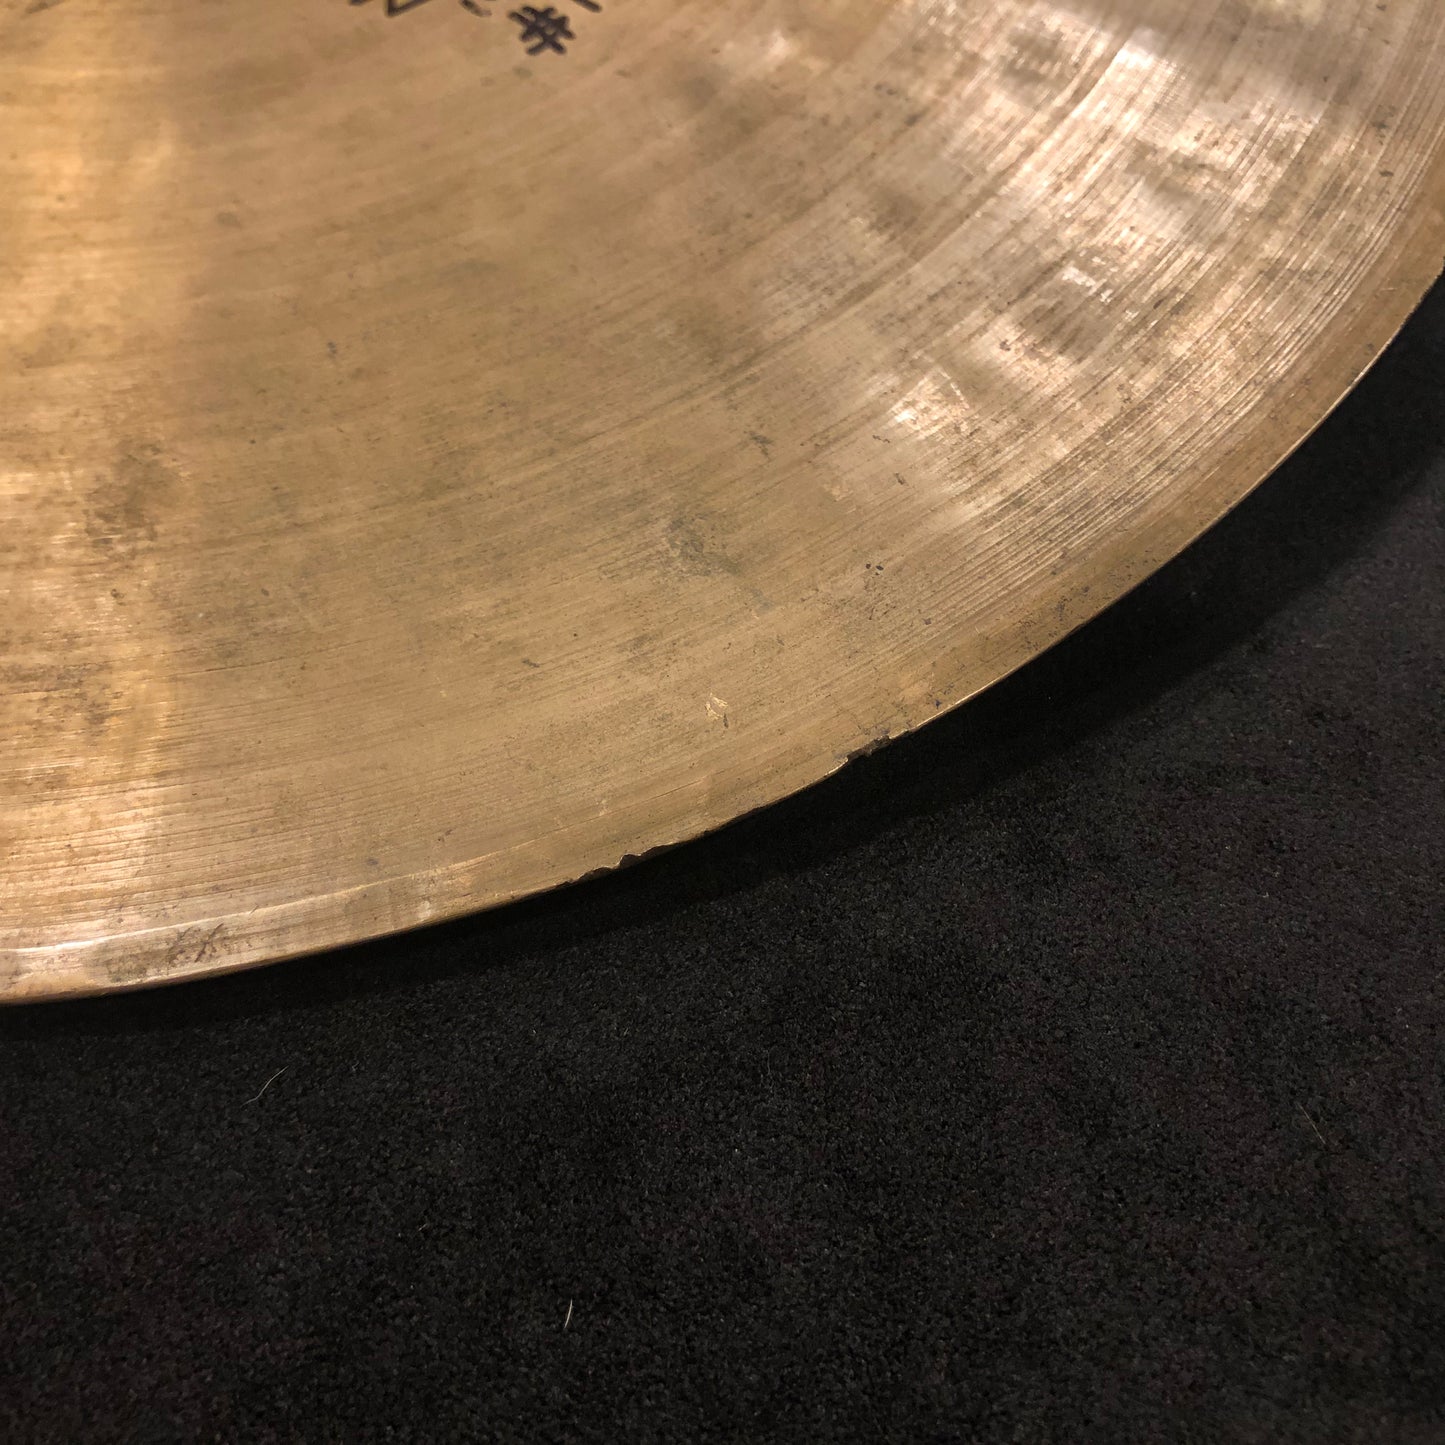 15" Zeltian 1930s/40s Small Ride Cymbal 1486g #266